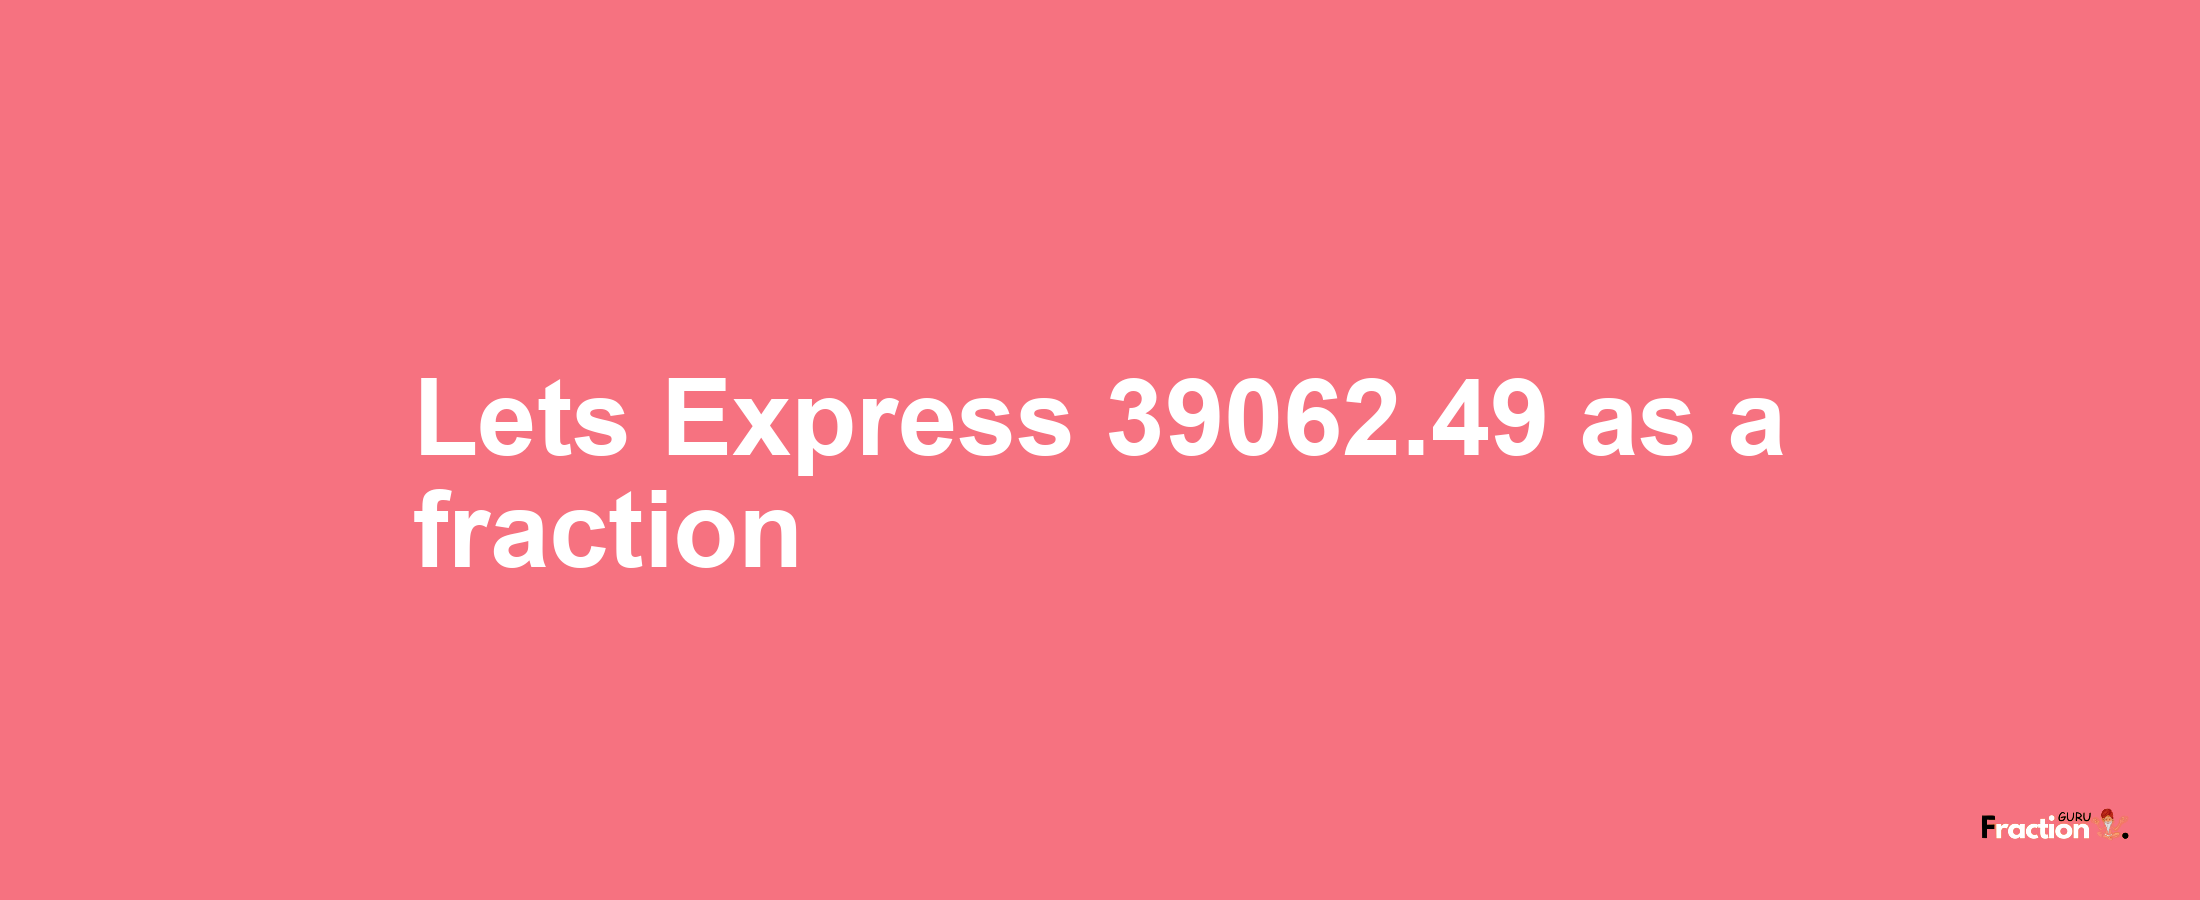 Lets Express 39062.49 as afraction